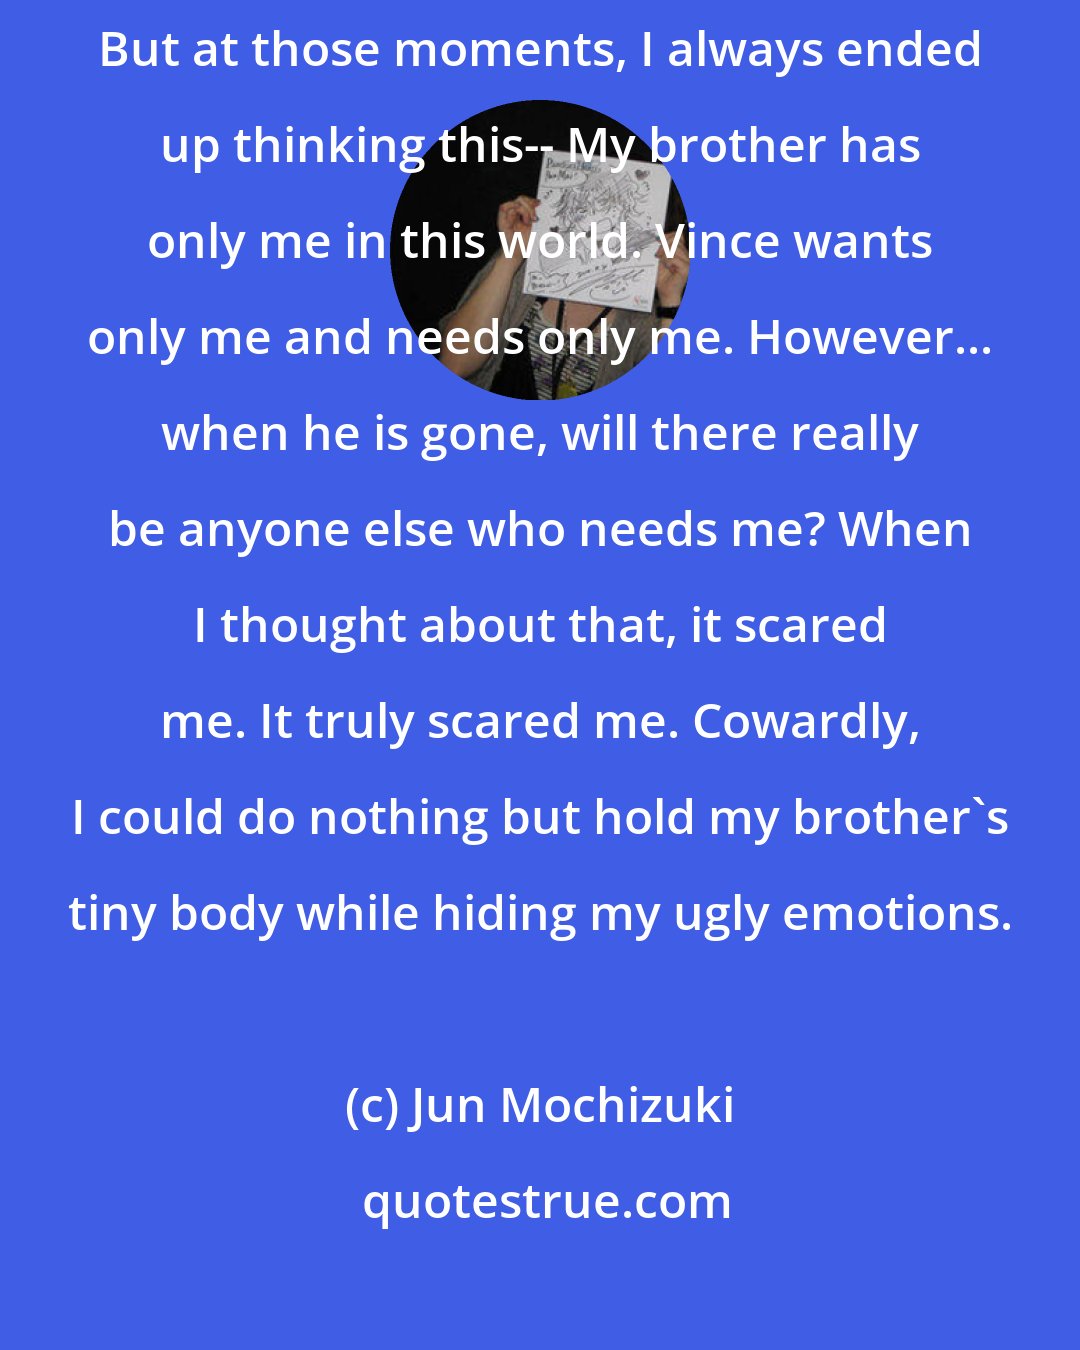 Jun Mochizuki: I tried many, many times to run away while my little brother was asleep. But at those moments, I always ended up thinking this-- My brother has only me in this world. Vince wants only me and needs only me. However... when he is gone, will there really be anyone else who needs me? When I thought about that, it scared me. It truly scared me. Cowardly, I could do nothing but hold my brother's tiny body while hiding my ugly emotions.